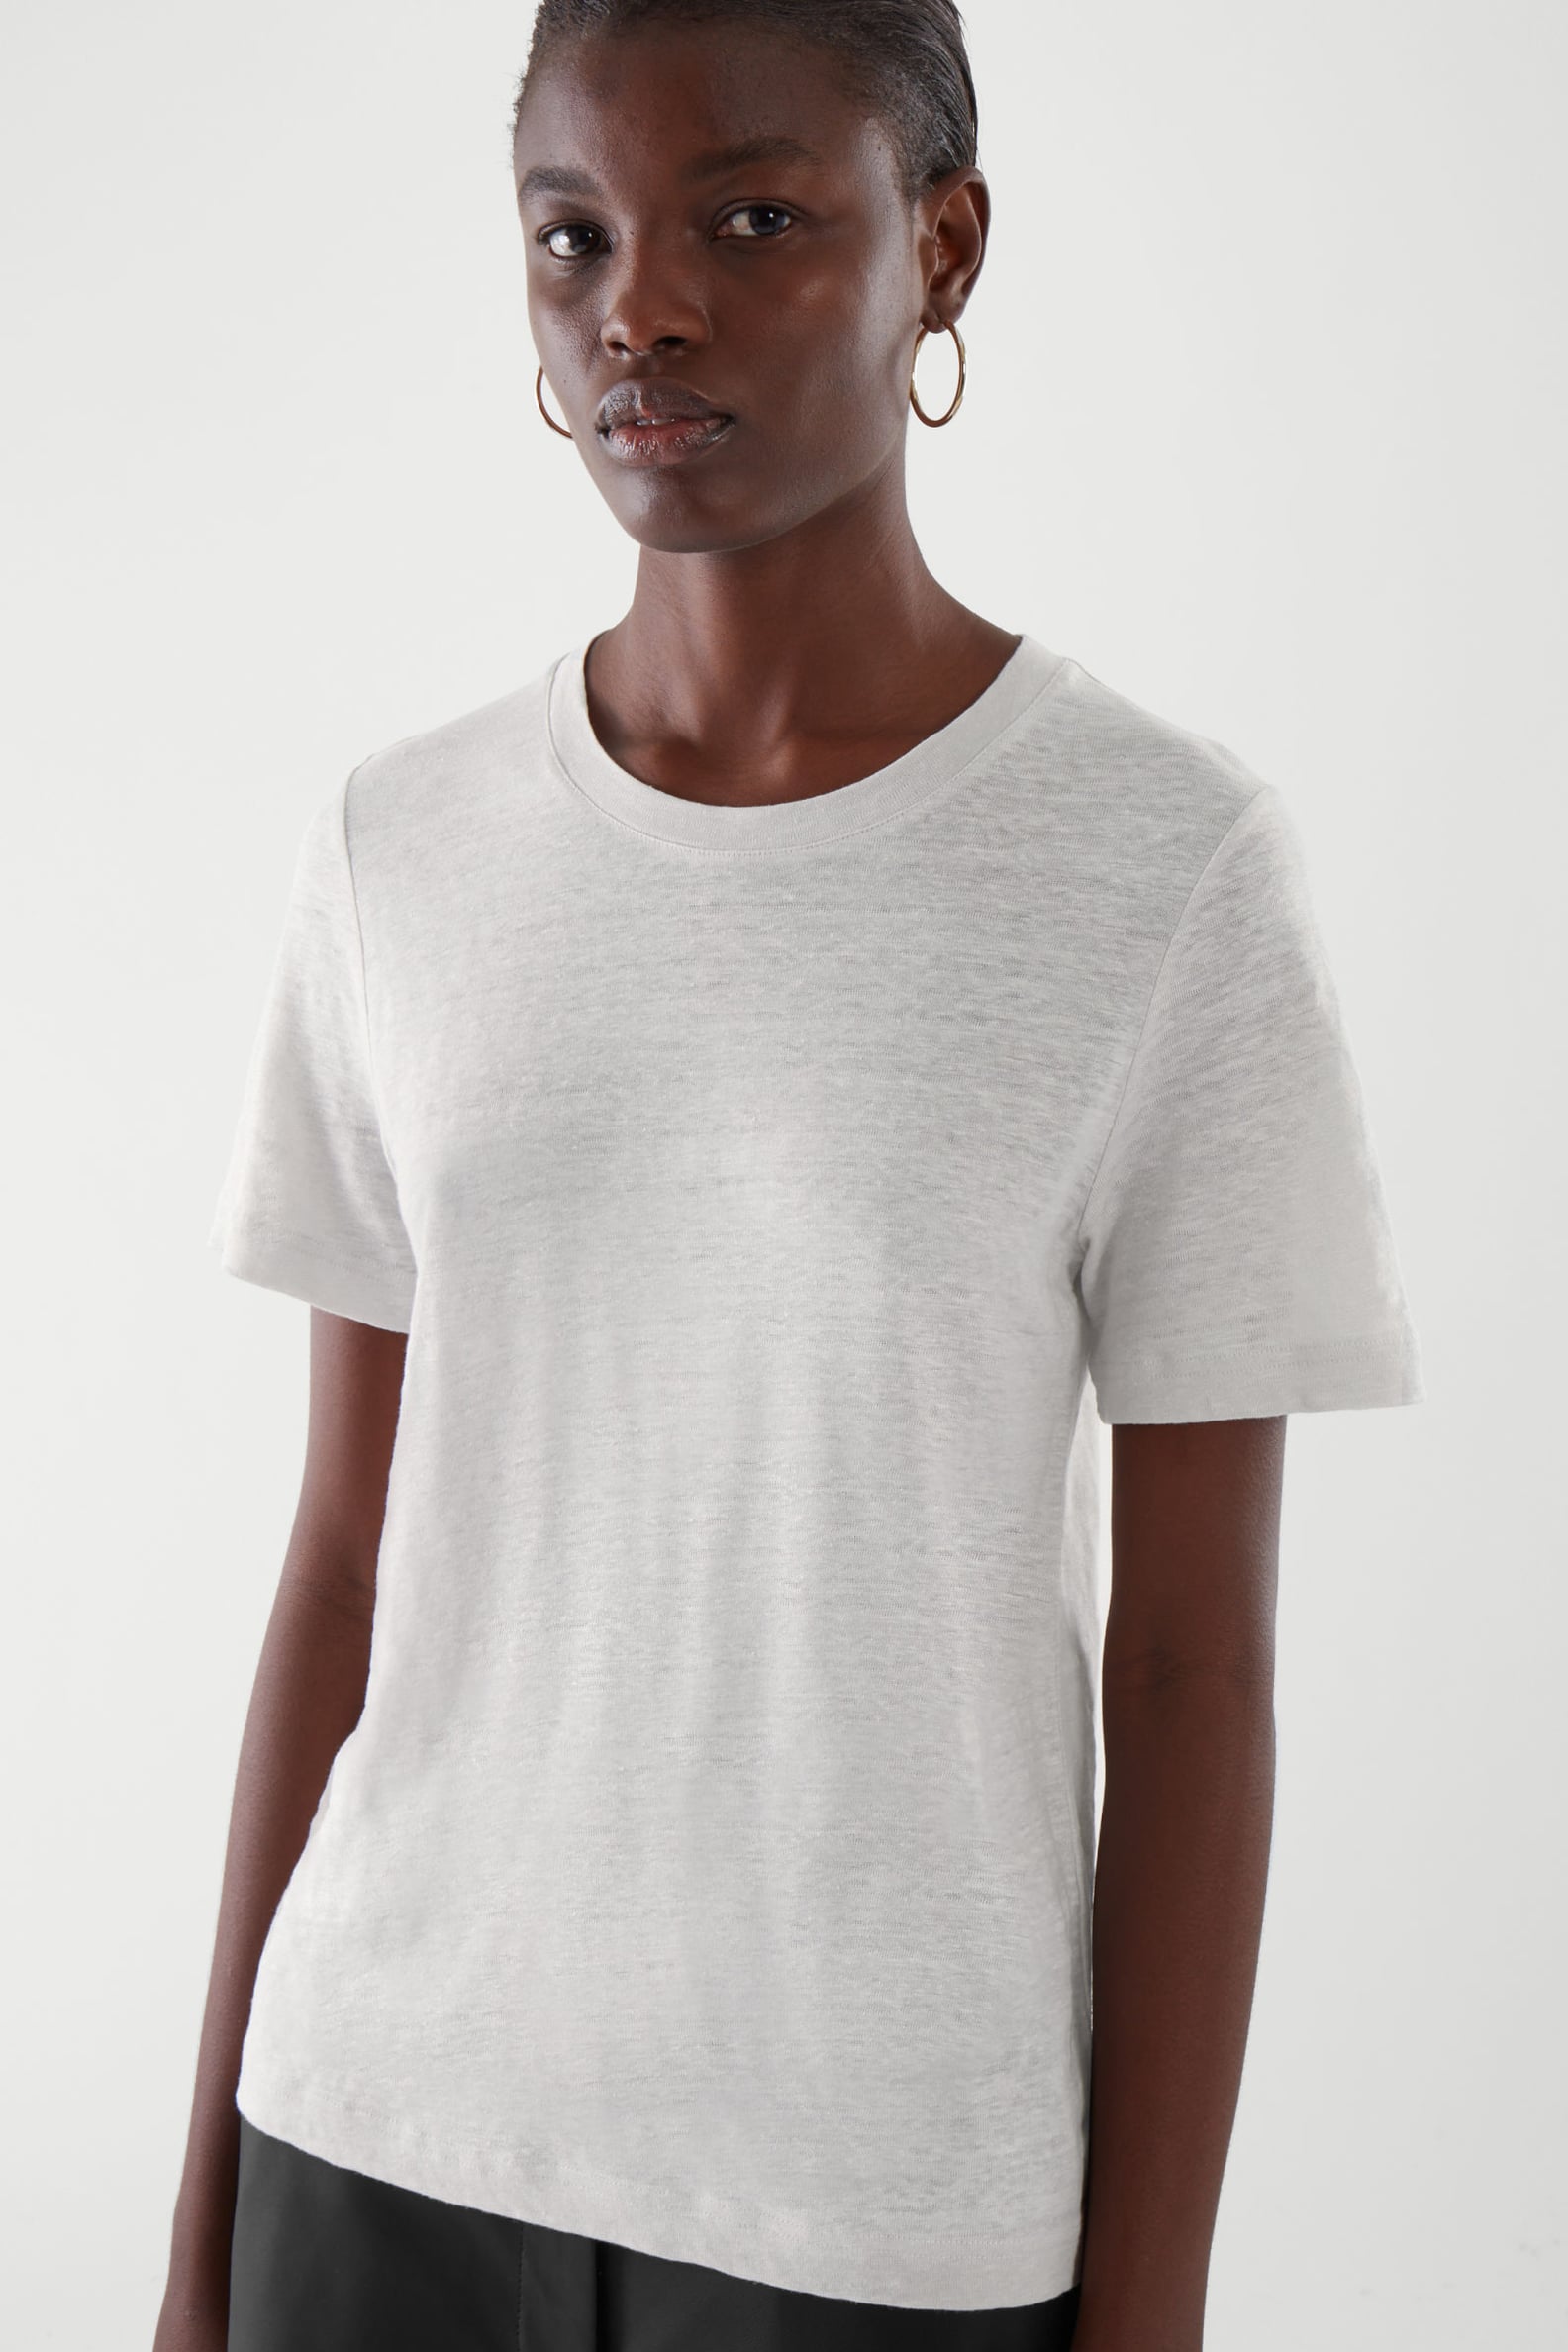 Linen Tees That Will Have Your Back All Summer | POPSUGAR Fashion